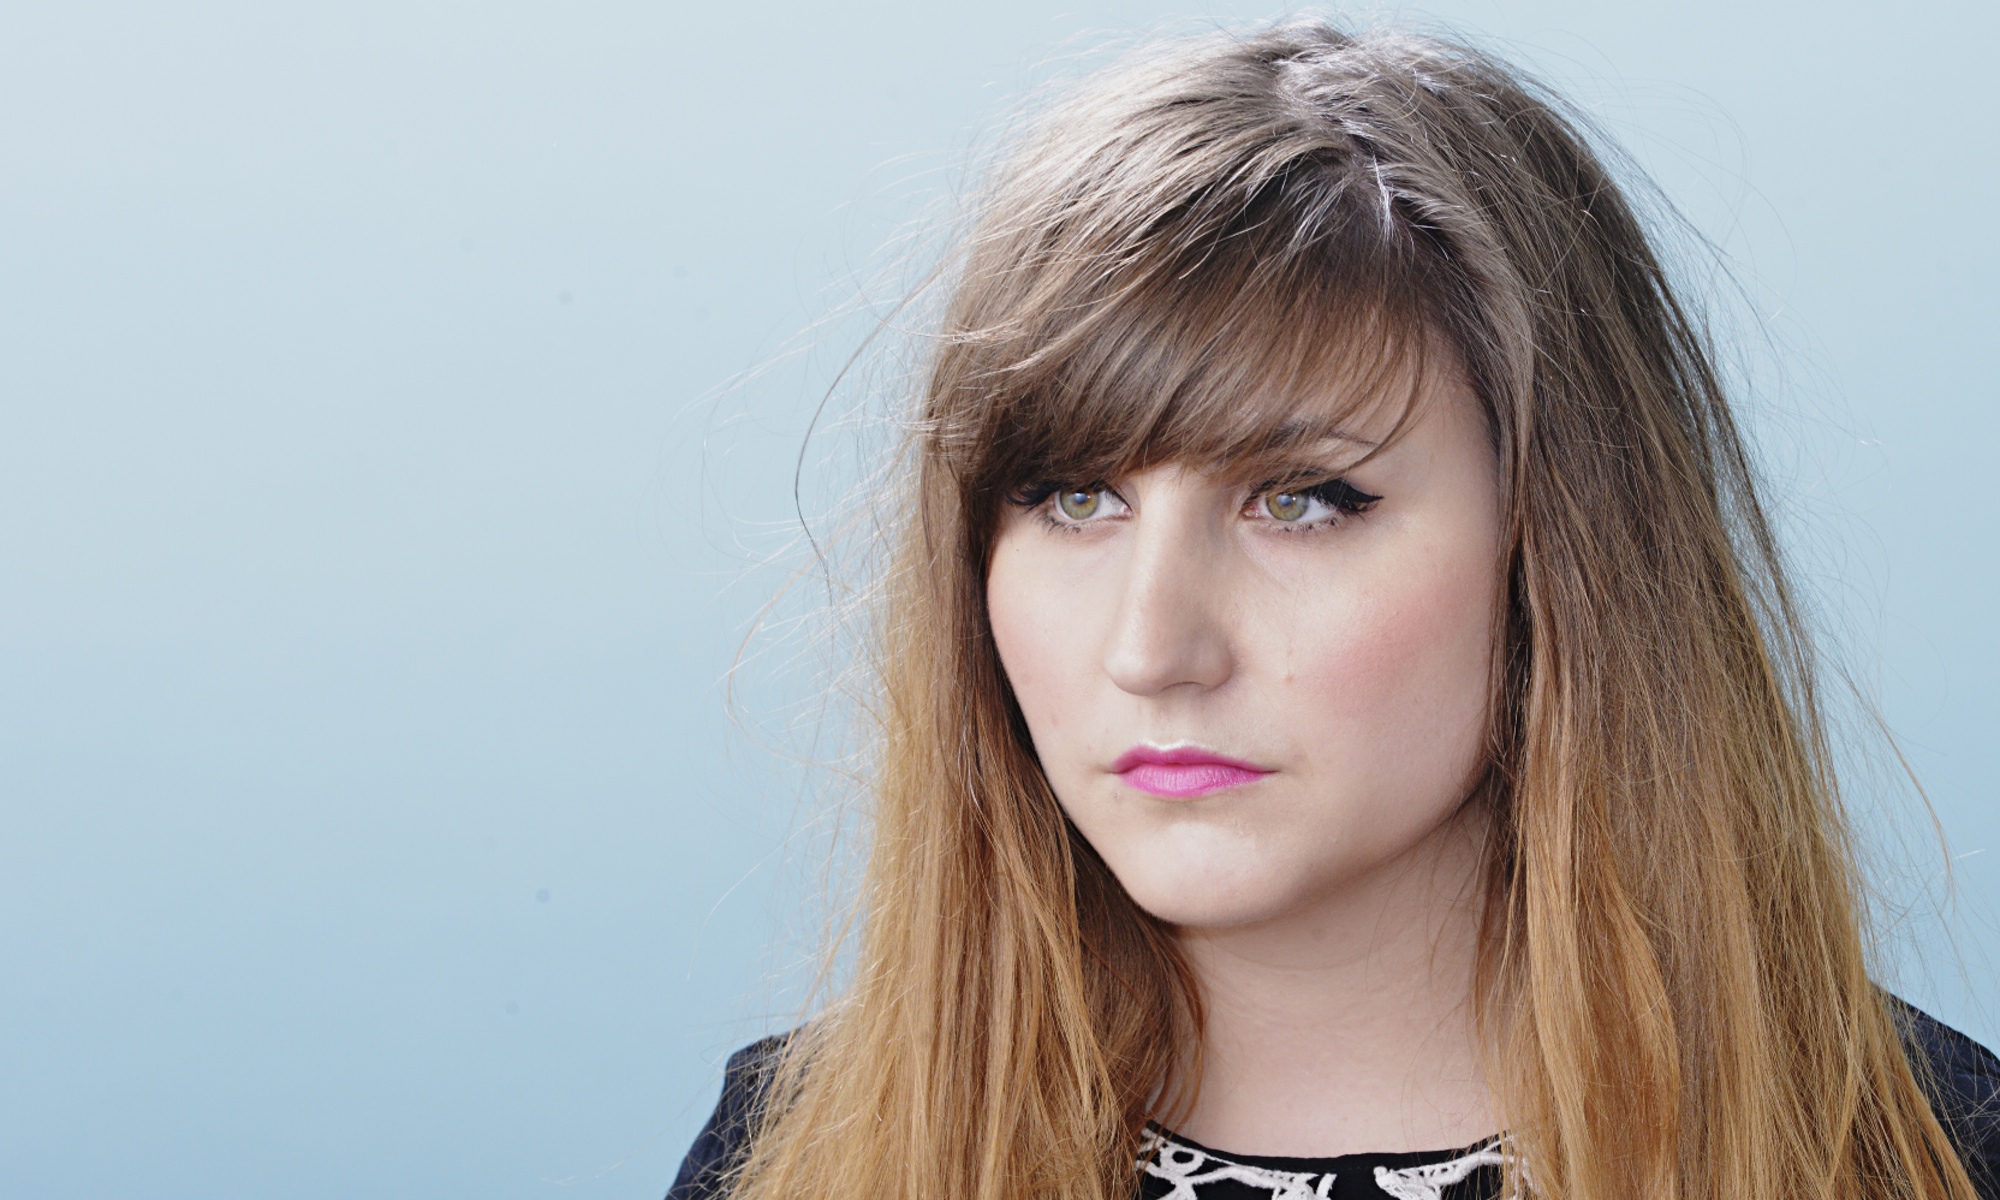 Natasia Demetriou - comedy's most nervous standup? | Stage | The Guardian